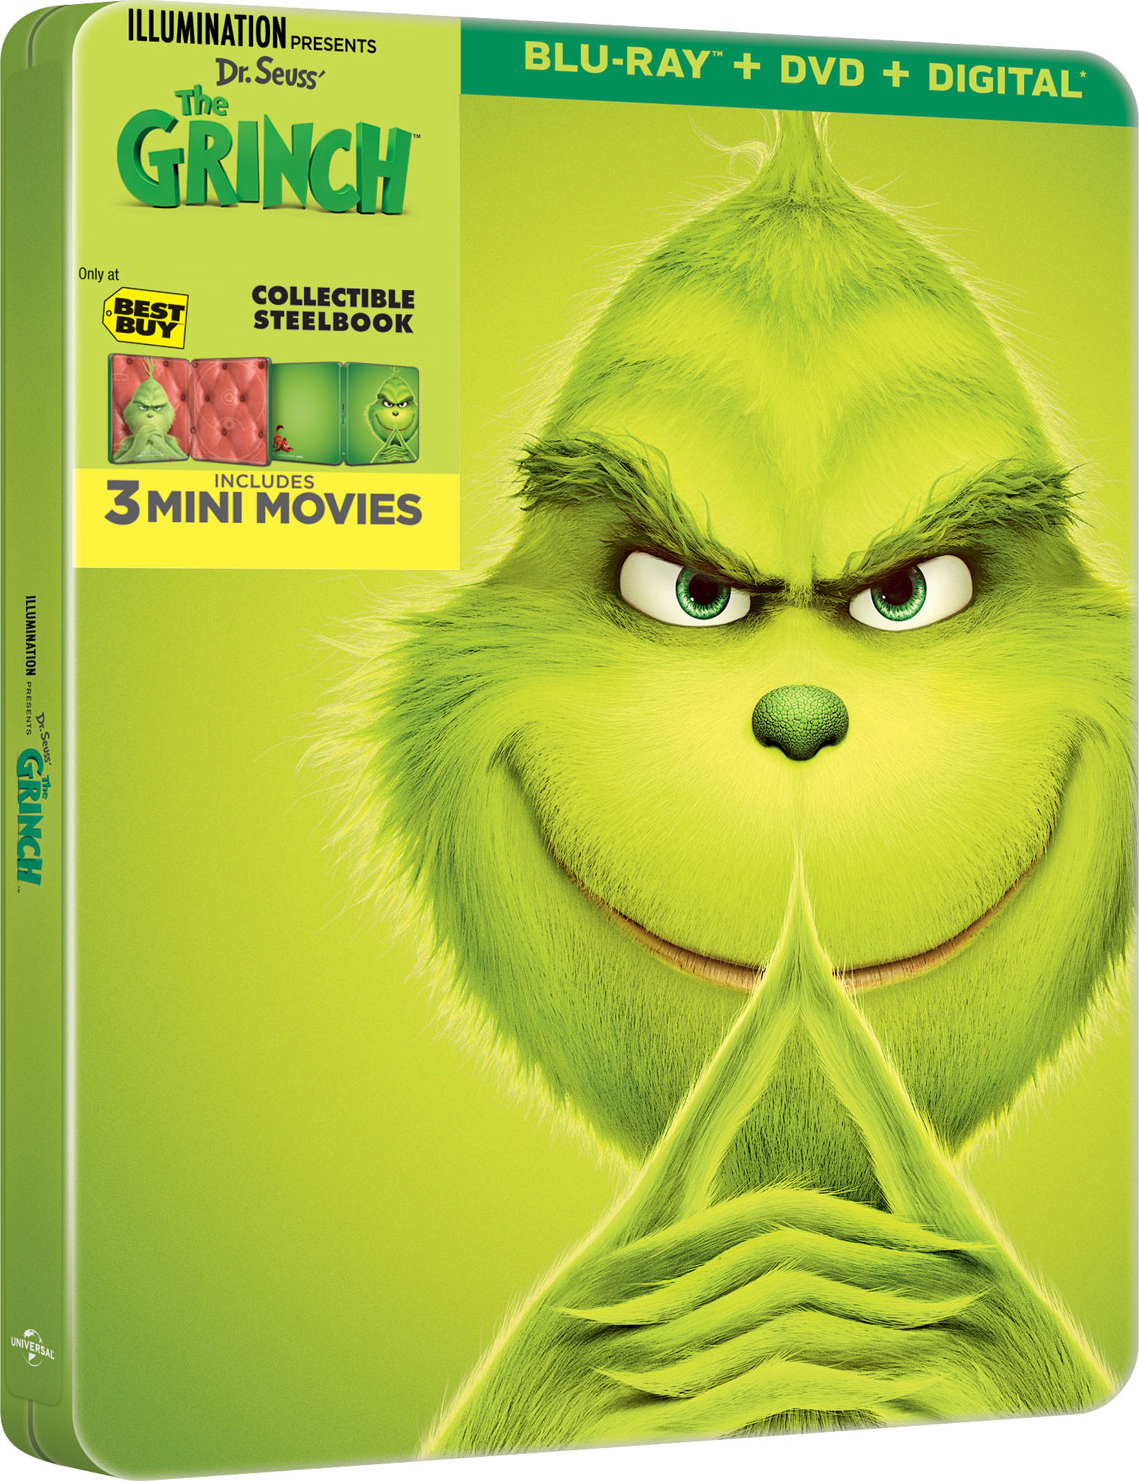 THE GRINCH Digital HD & Bluray Release Dates Announced & Special